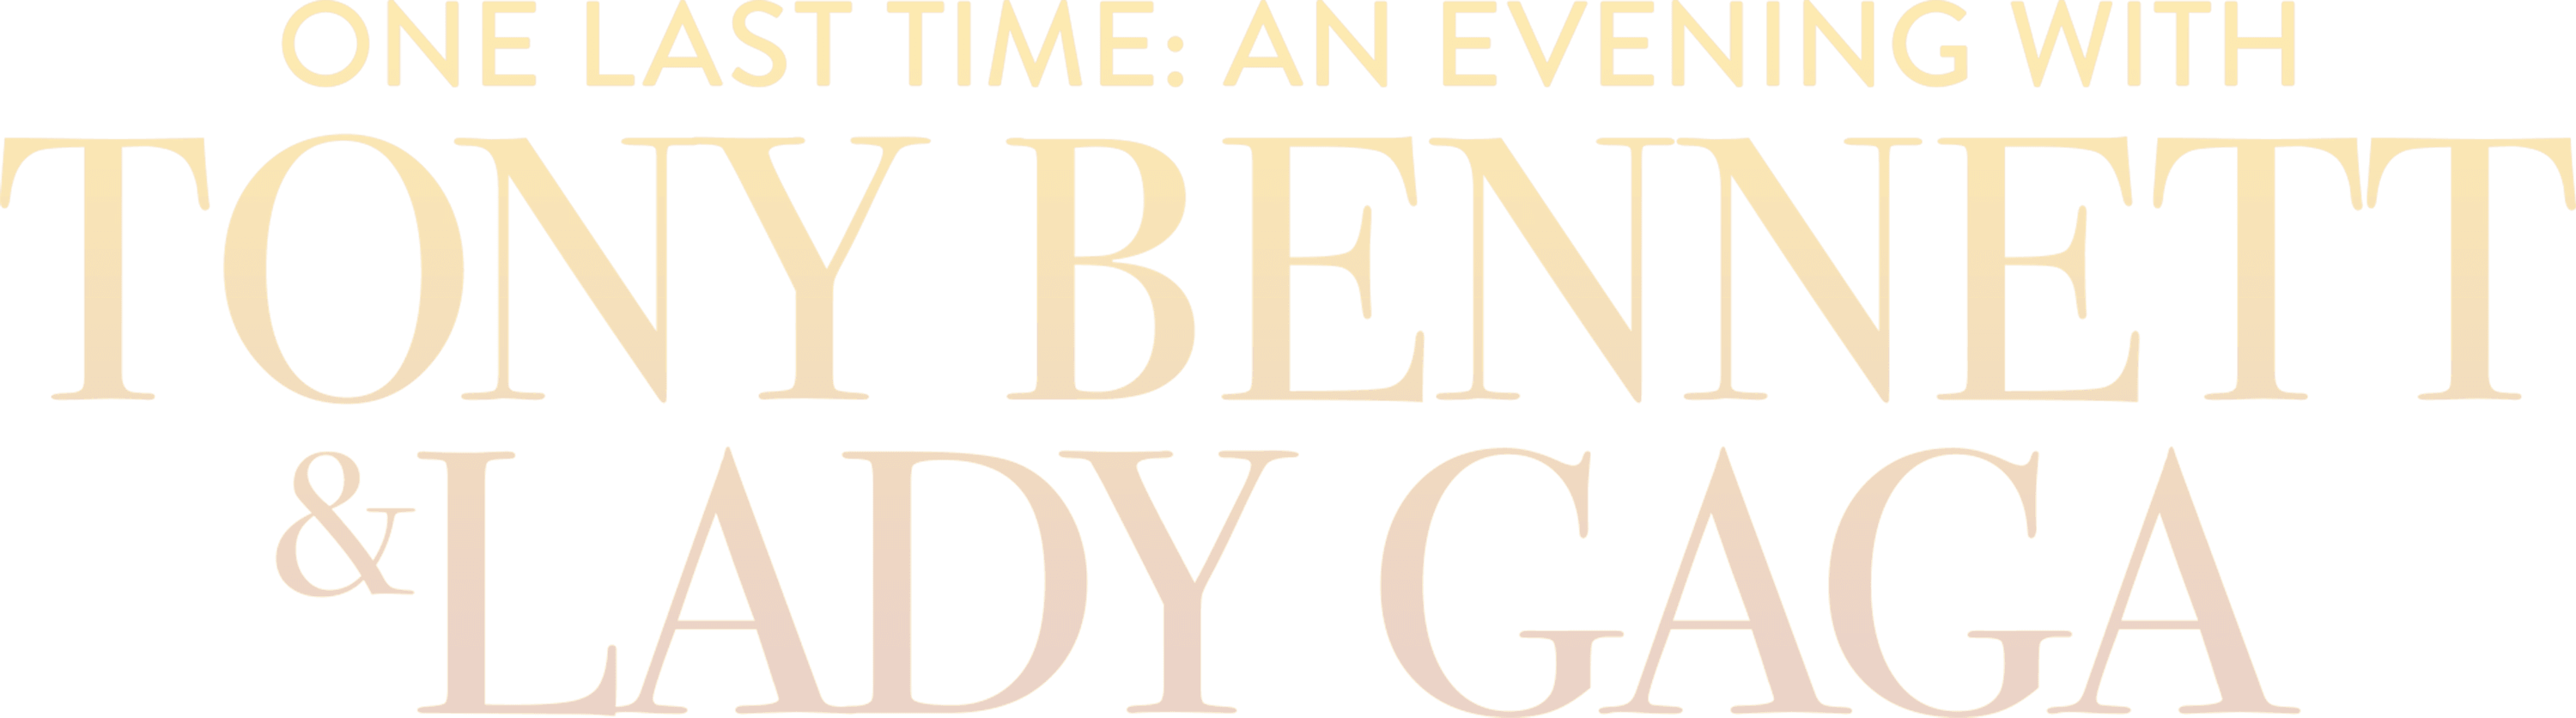 One Last Time: An Evening with Tony Bennett and Lady Gaga logo